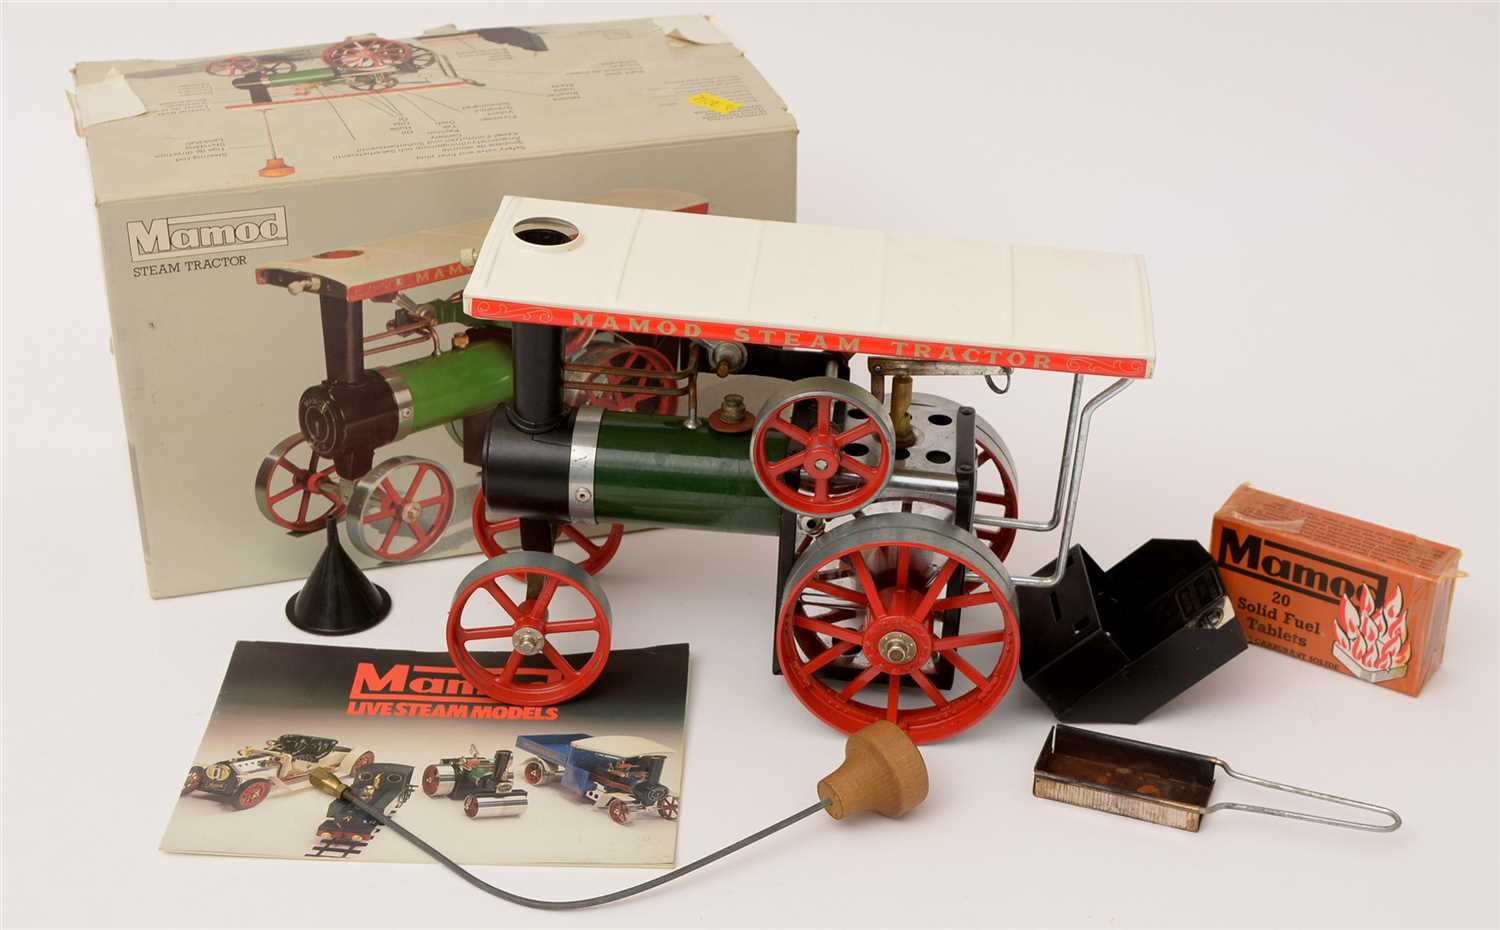 Lot 1203 - A Mamod live-steam model traction engine.